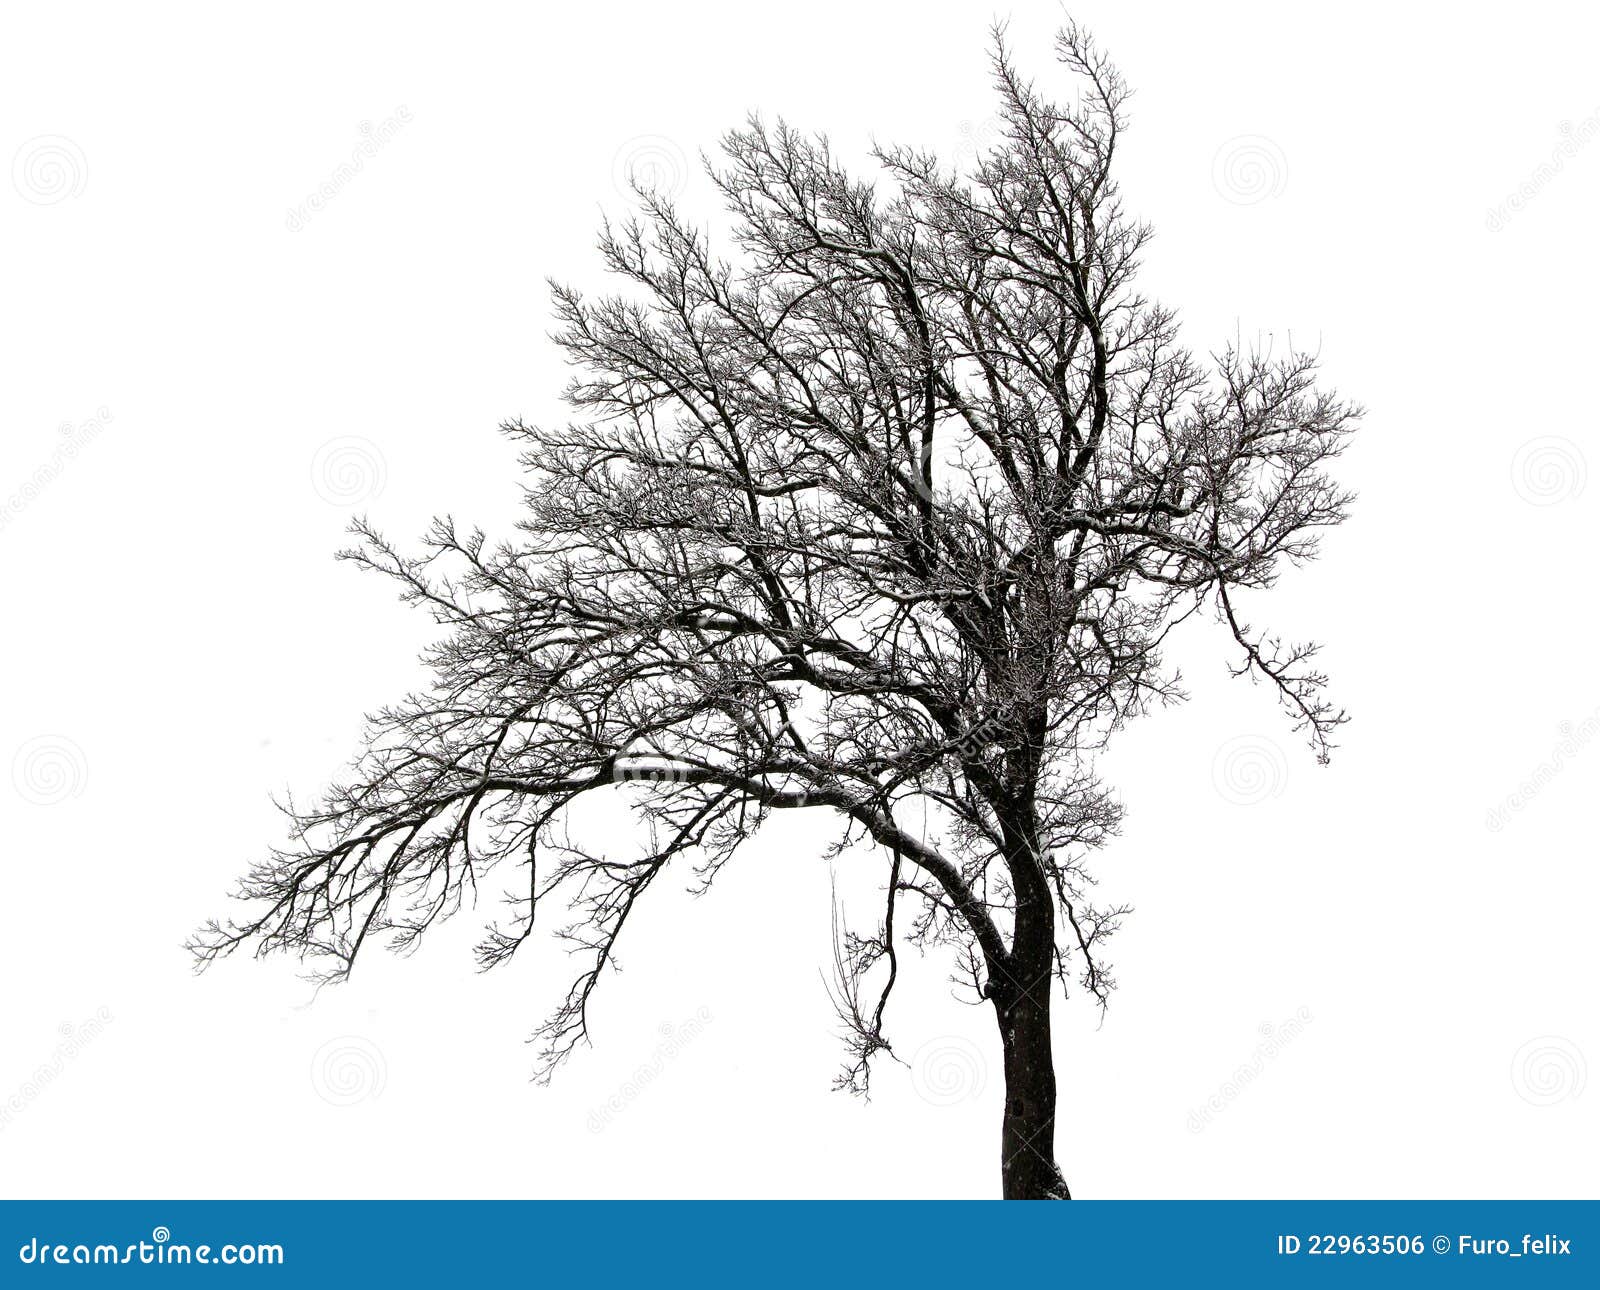 Snow covered tree stock photo. Image of thick, landscape - 22963506